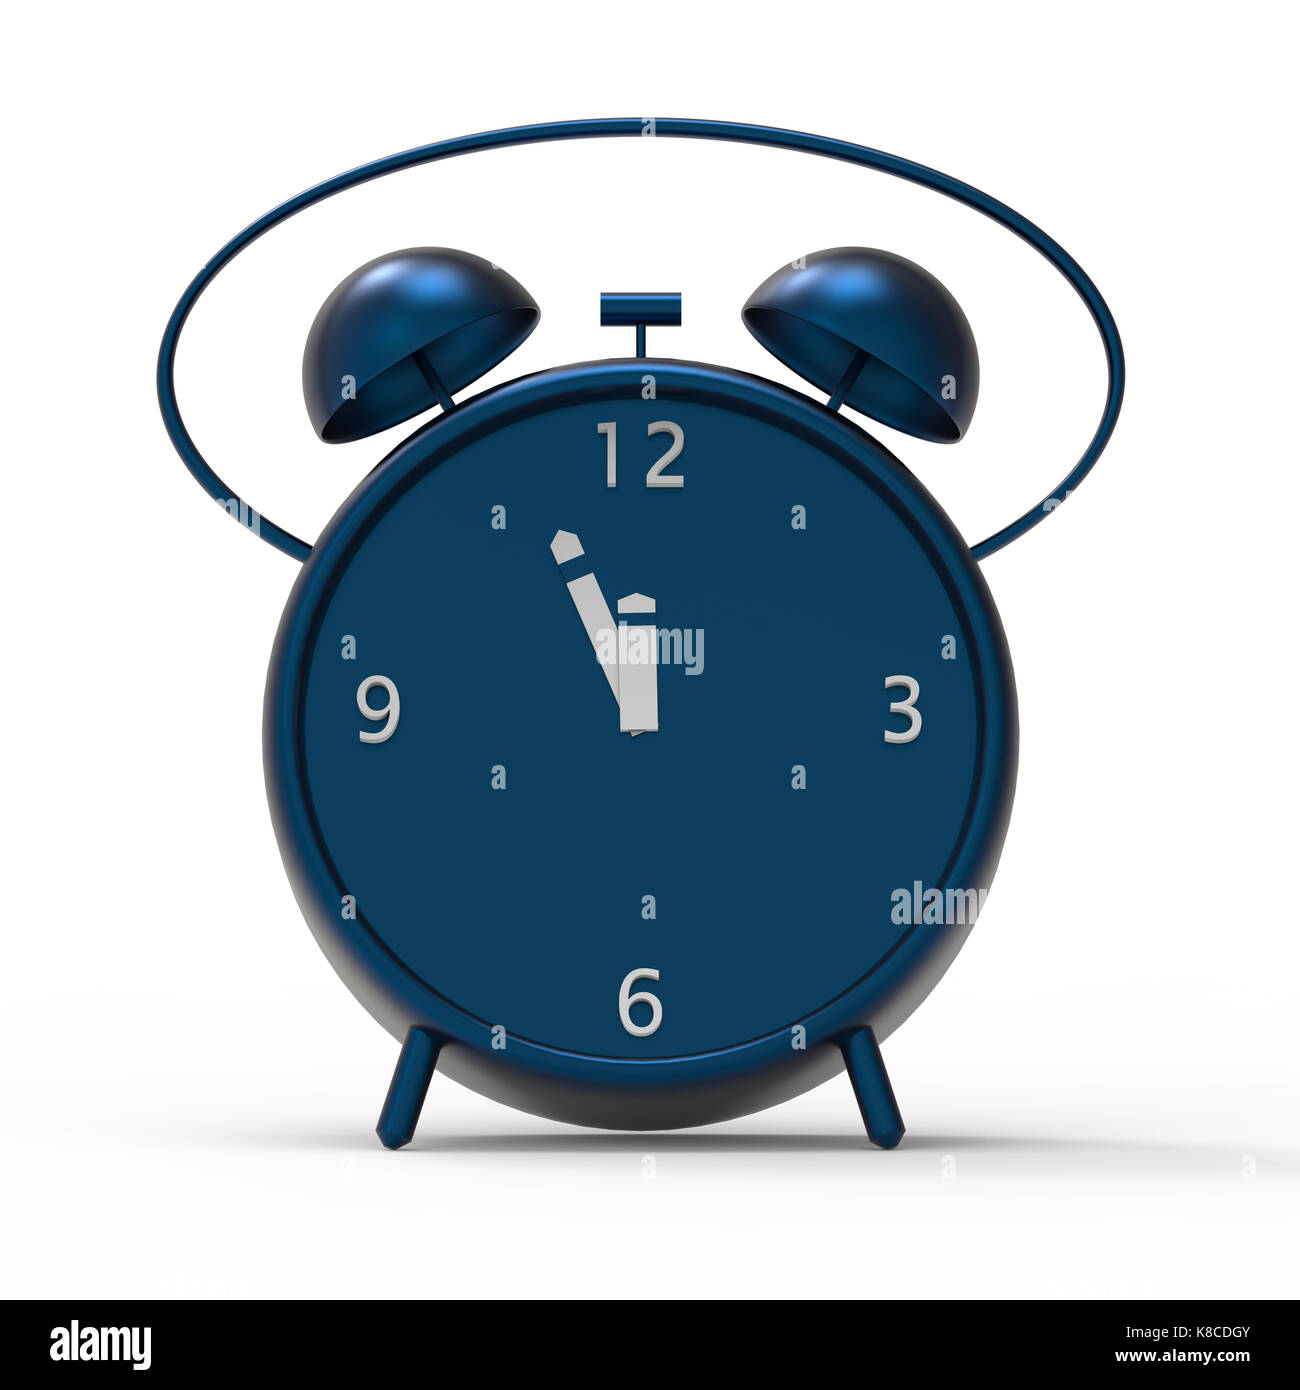 The alarm clock with little minutes to twelve o'clock Stock Photo